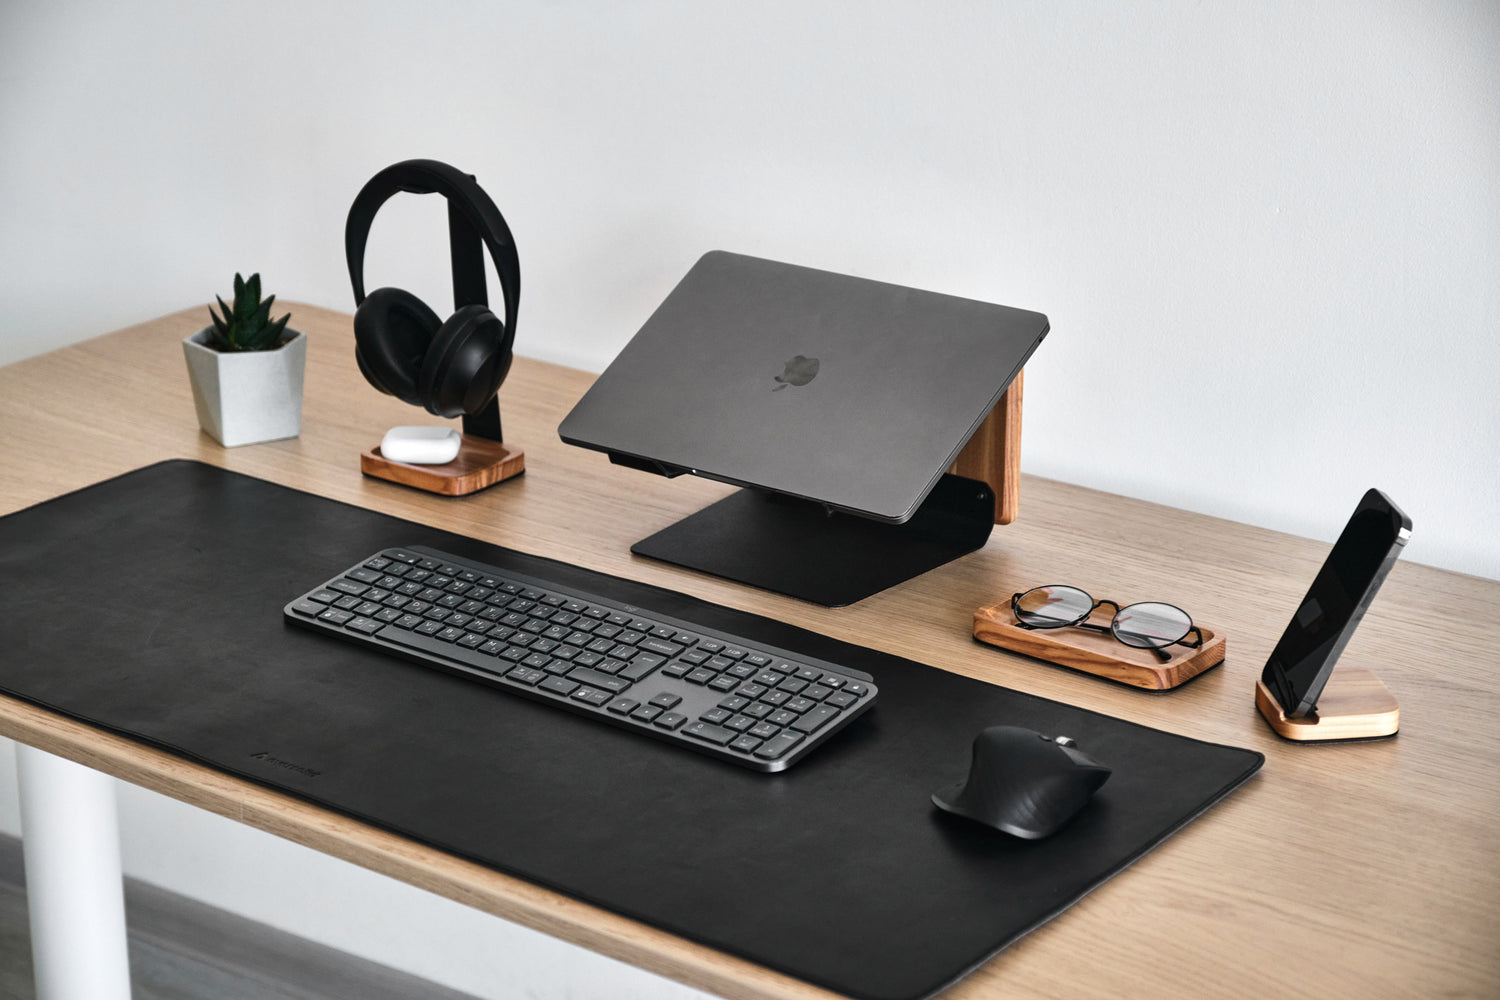 Designer's guide to setting up the perfect home workspace